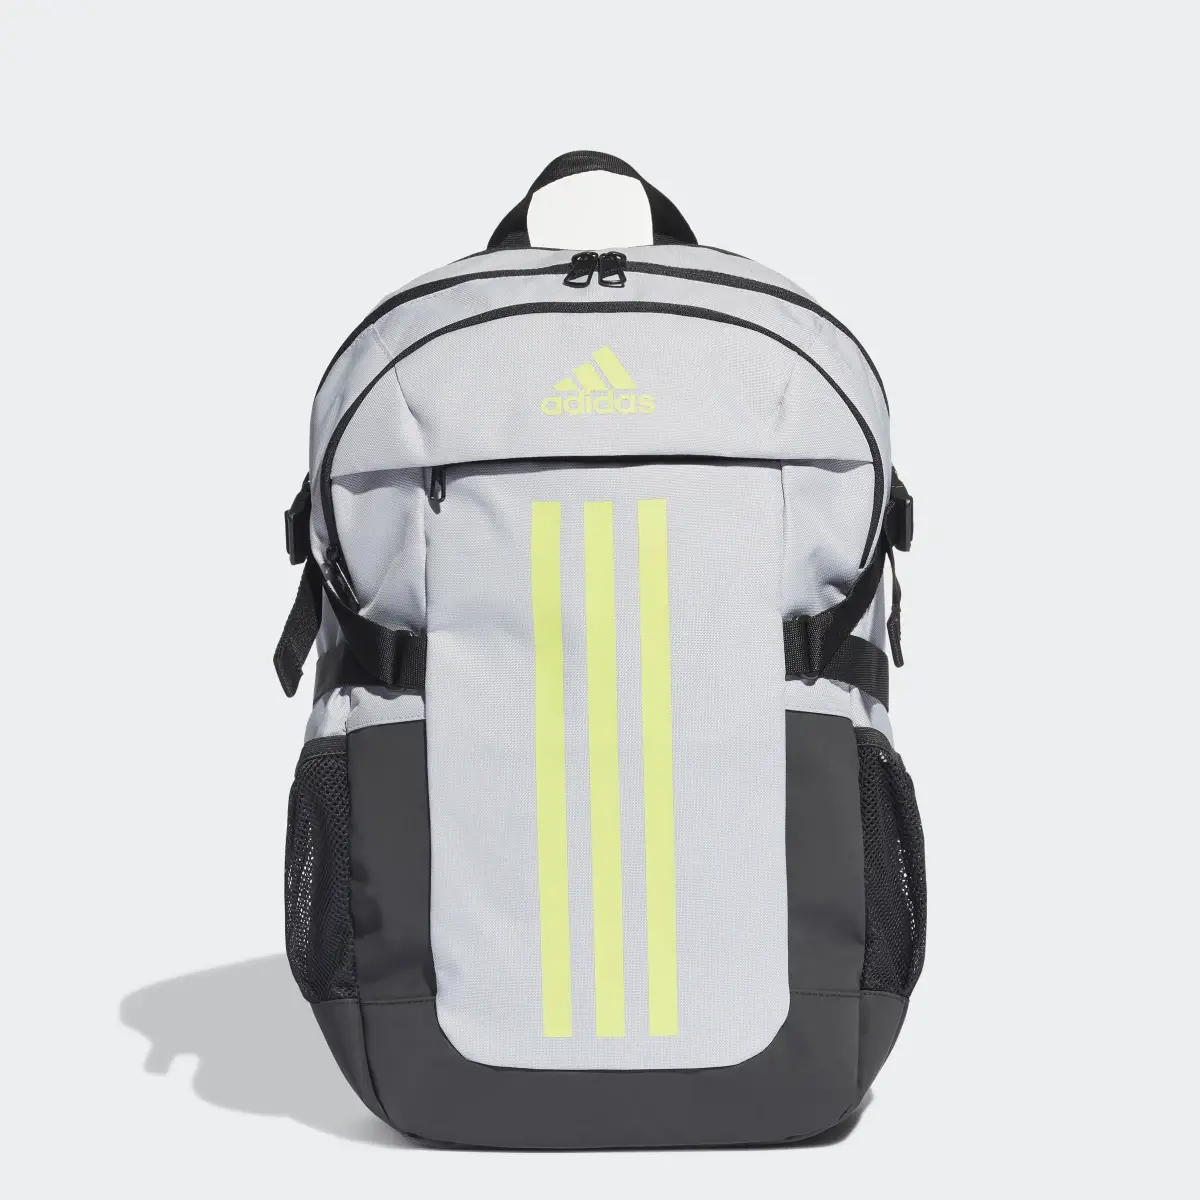 Adidas Power Backpack. 1